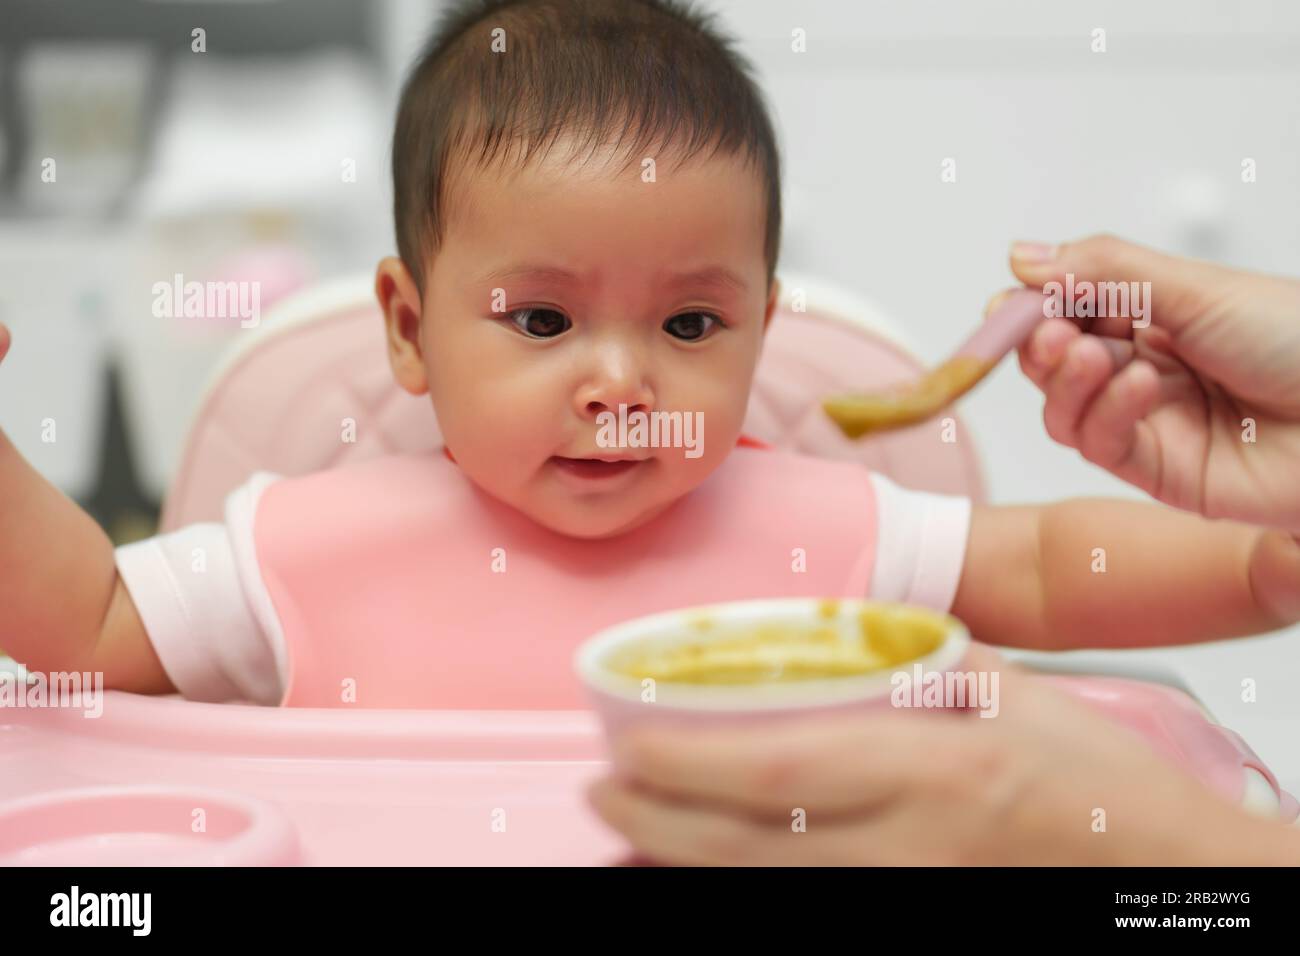 mother feeding food to her infant baby with a spoon at home Stock Photo